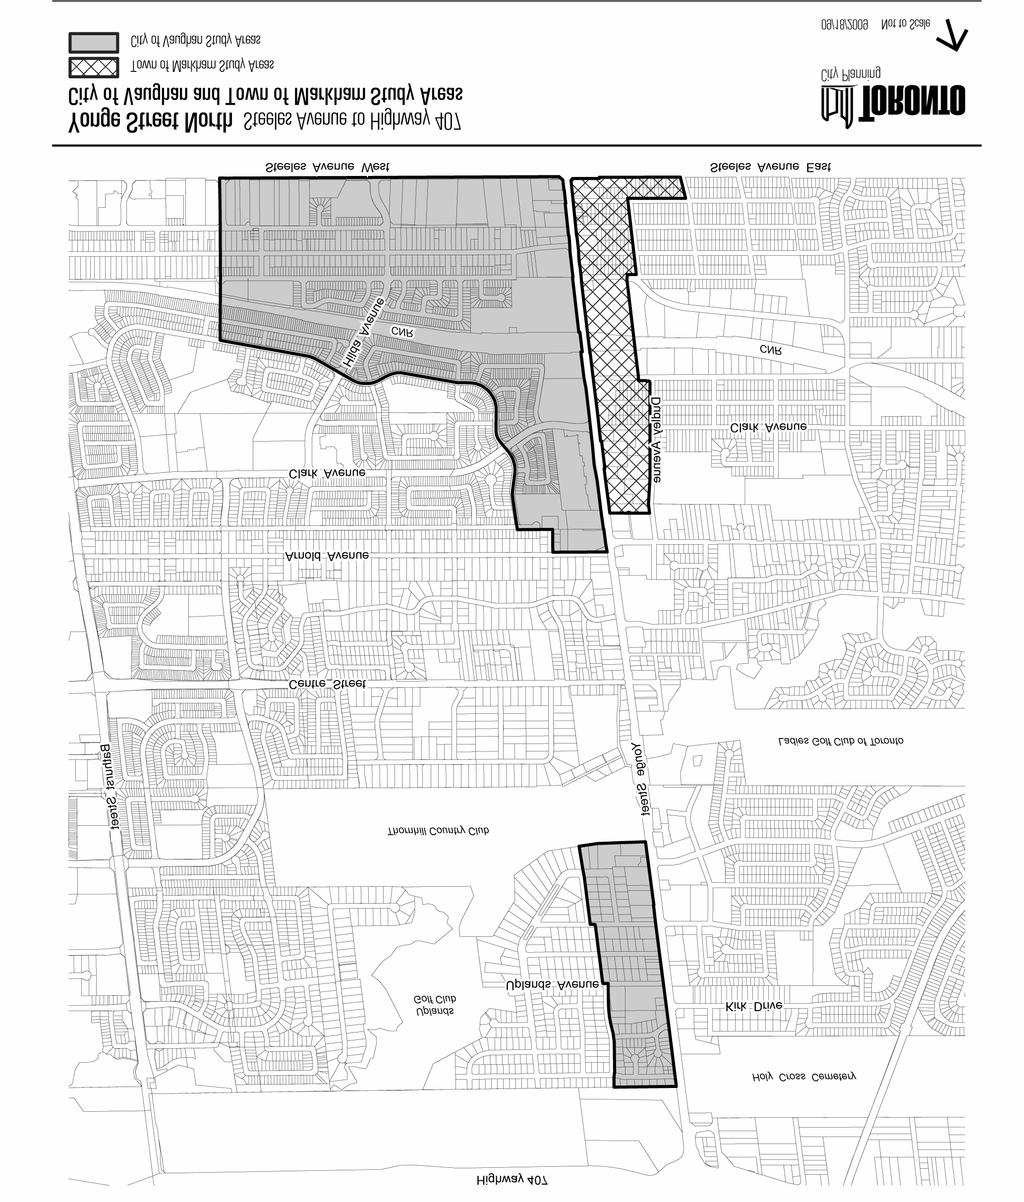 Attachment 1: Town of Markham and City of